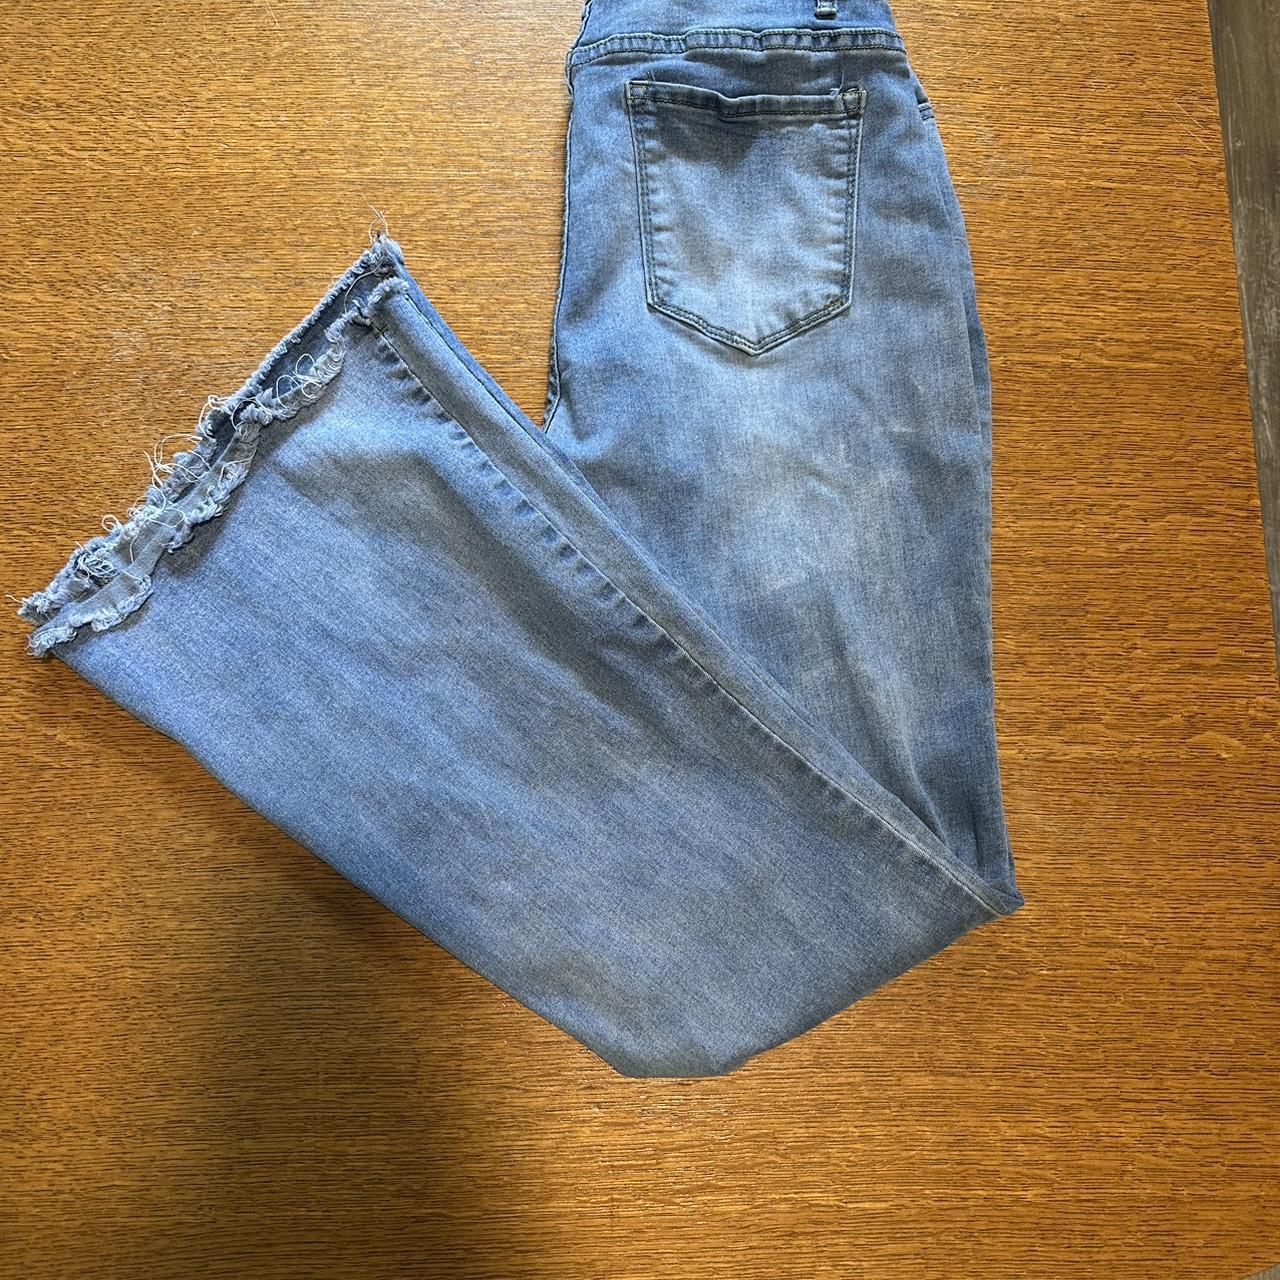 Kunmi Boot Cut Jeans Size: 27x30 Condition: like new - Depop